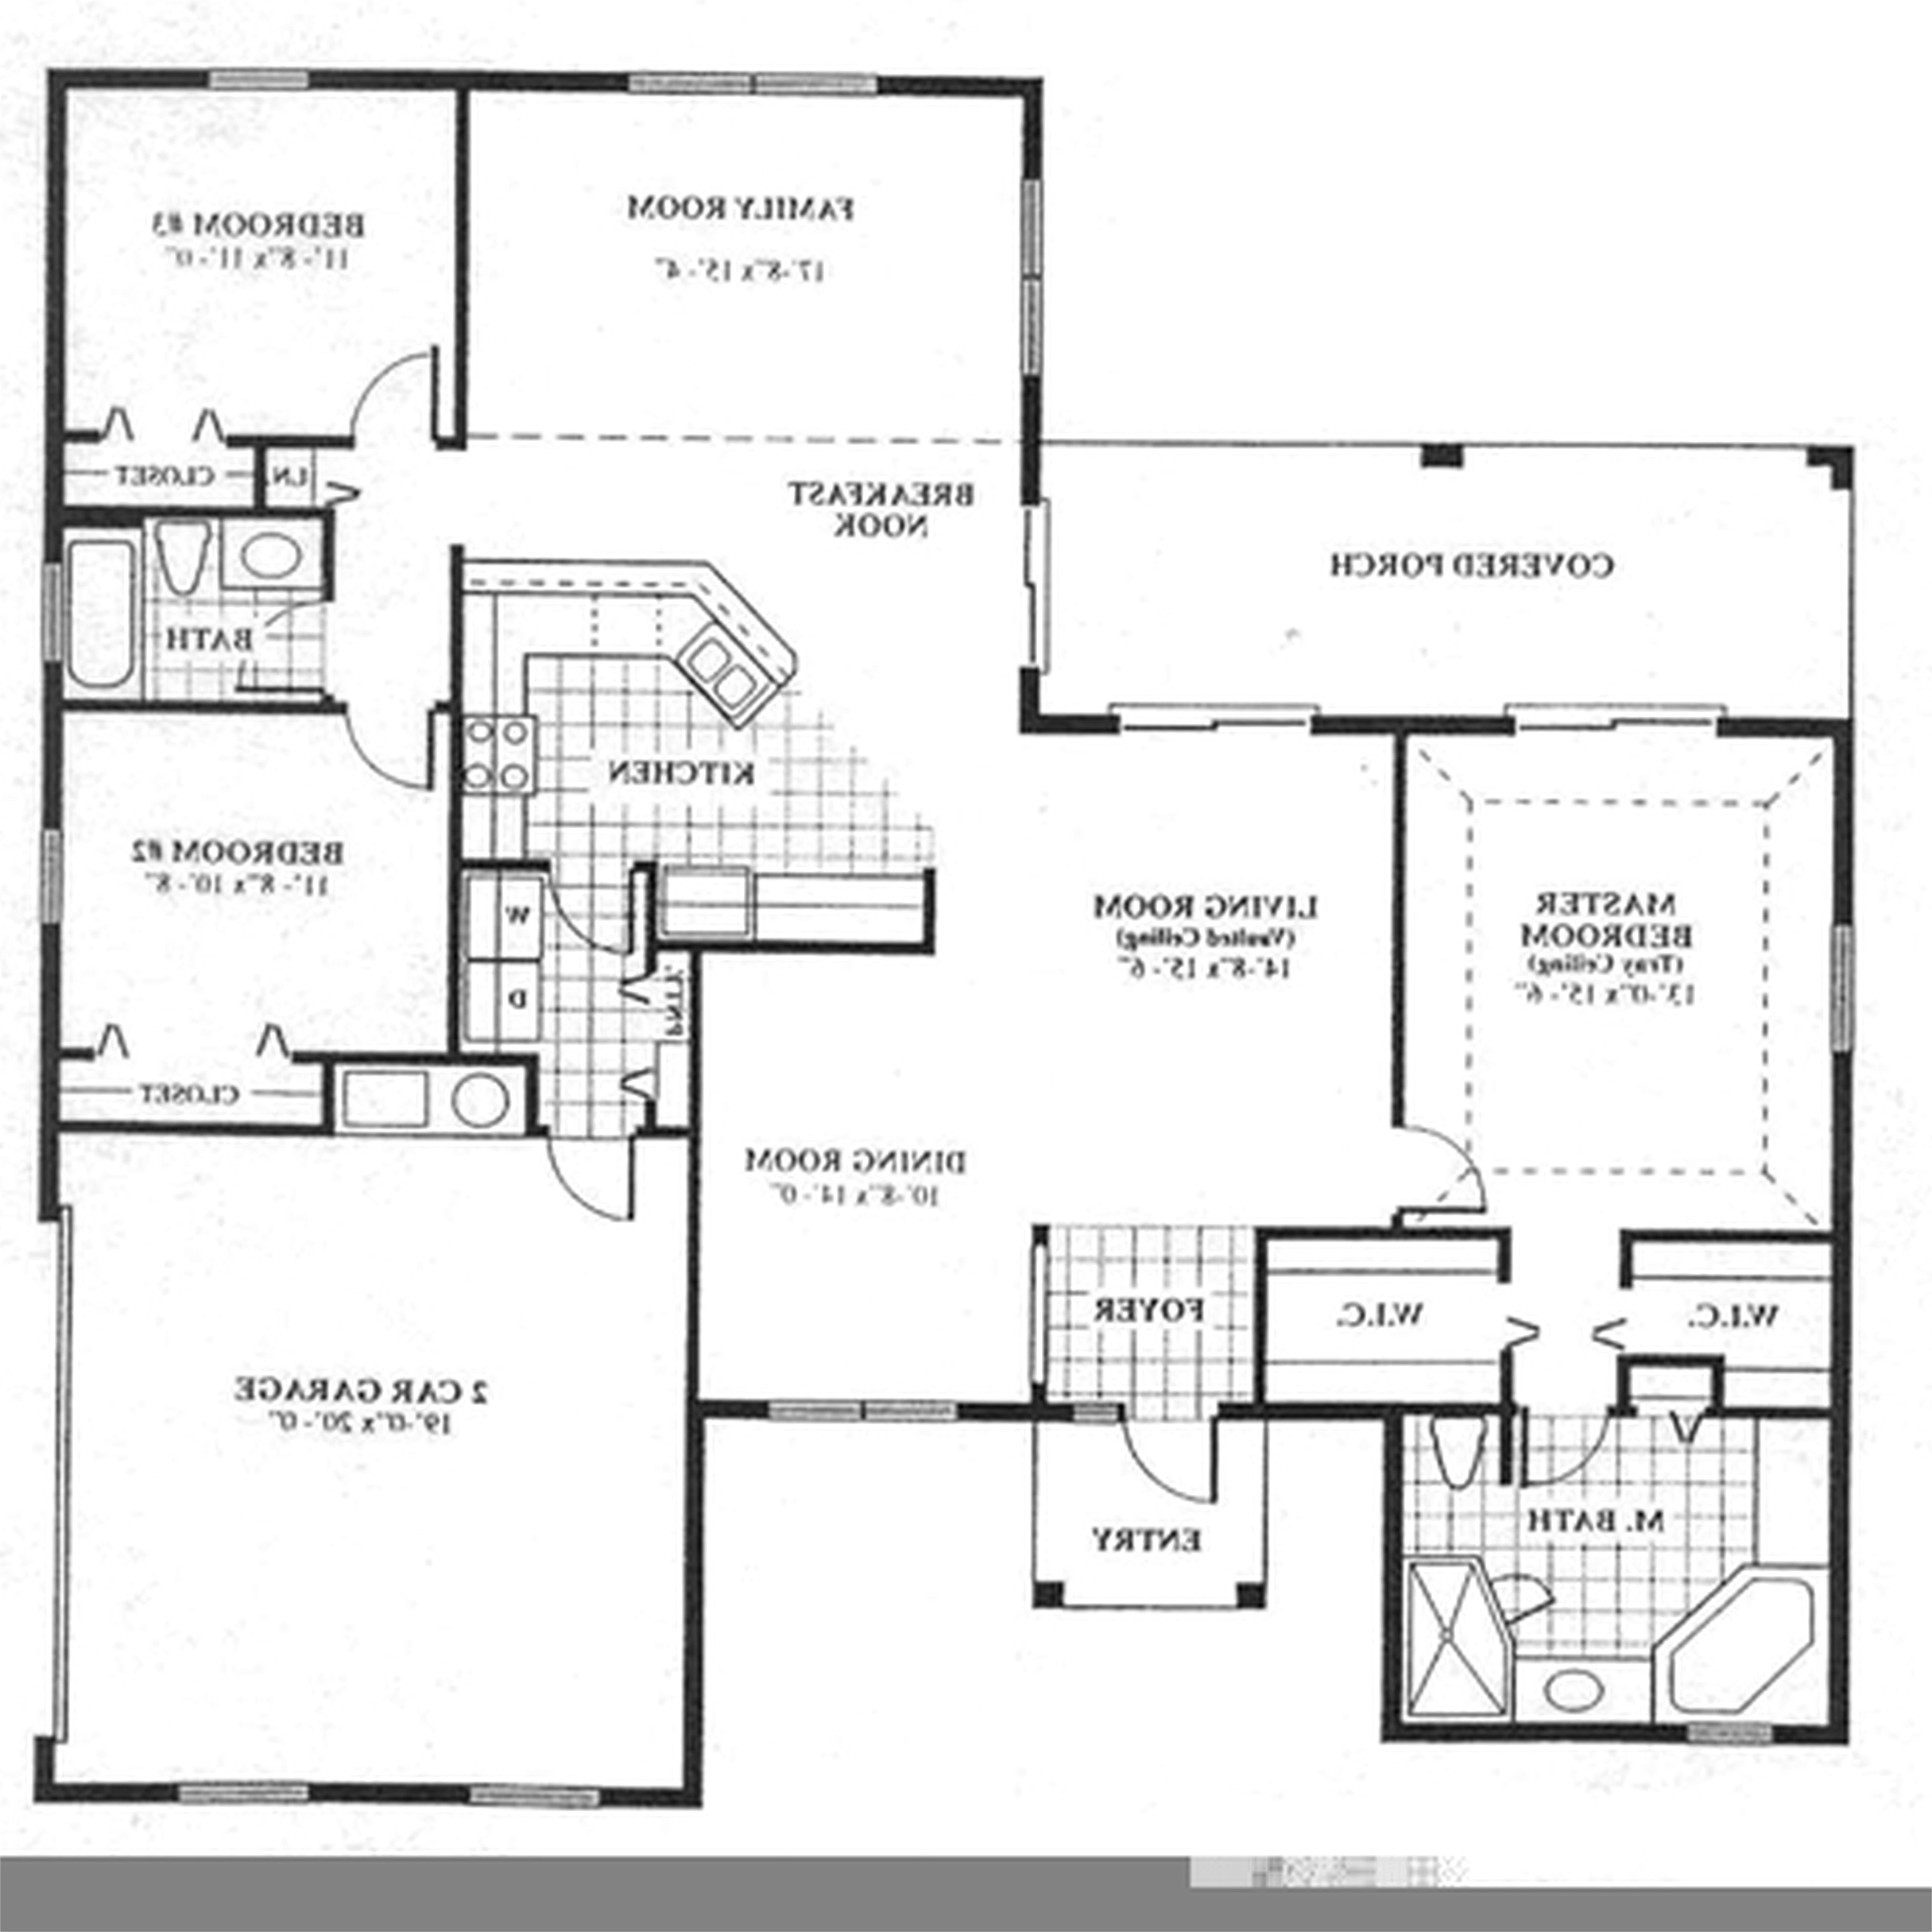 house plans build your own